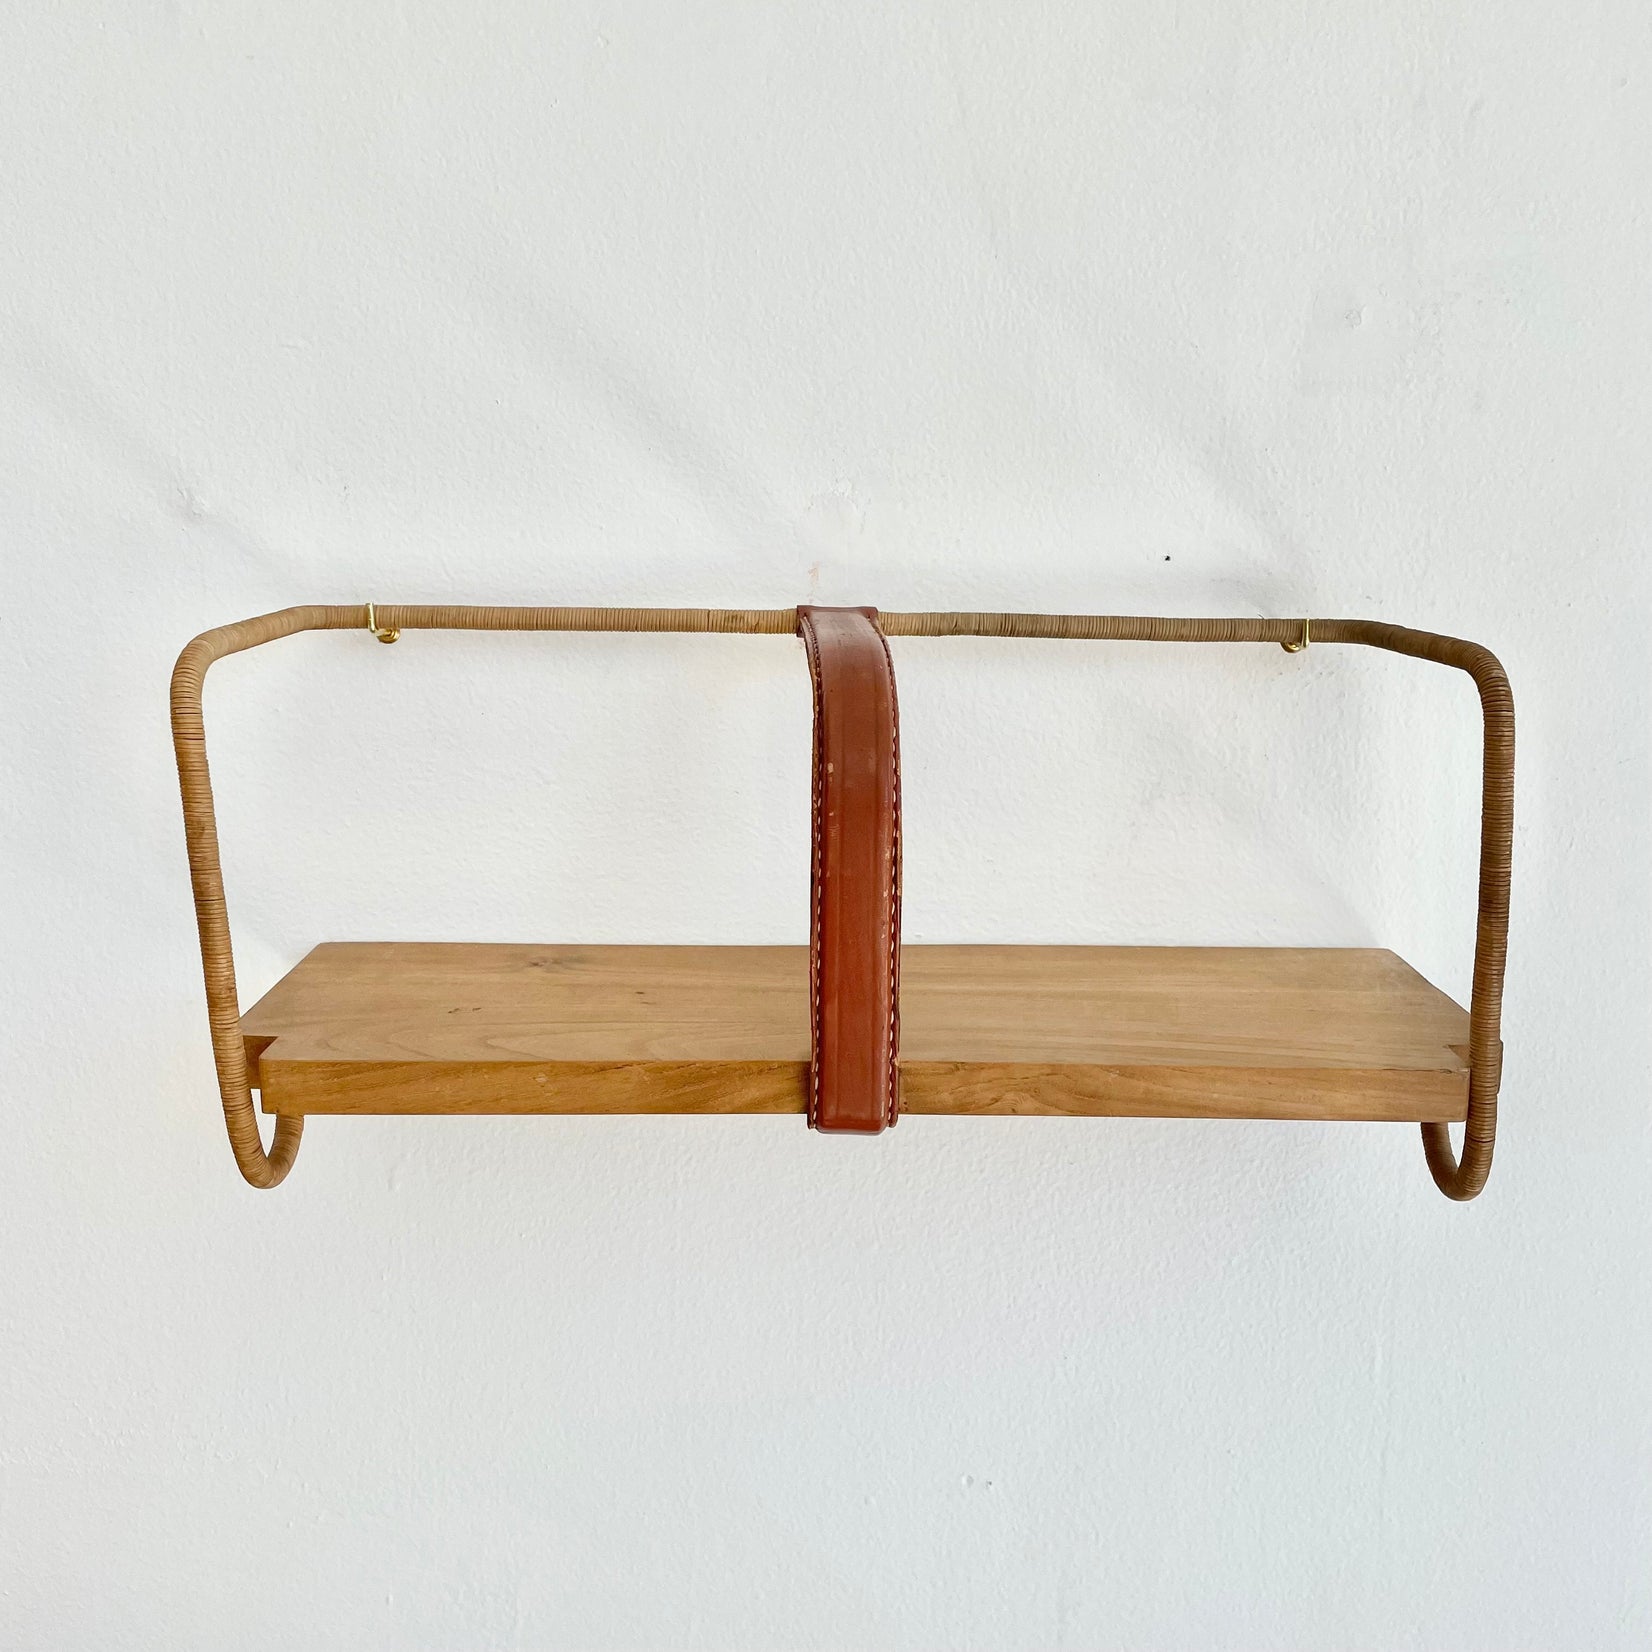 Jacques Adnet Leather, Wood and Twine Shelf, 1950s France